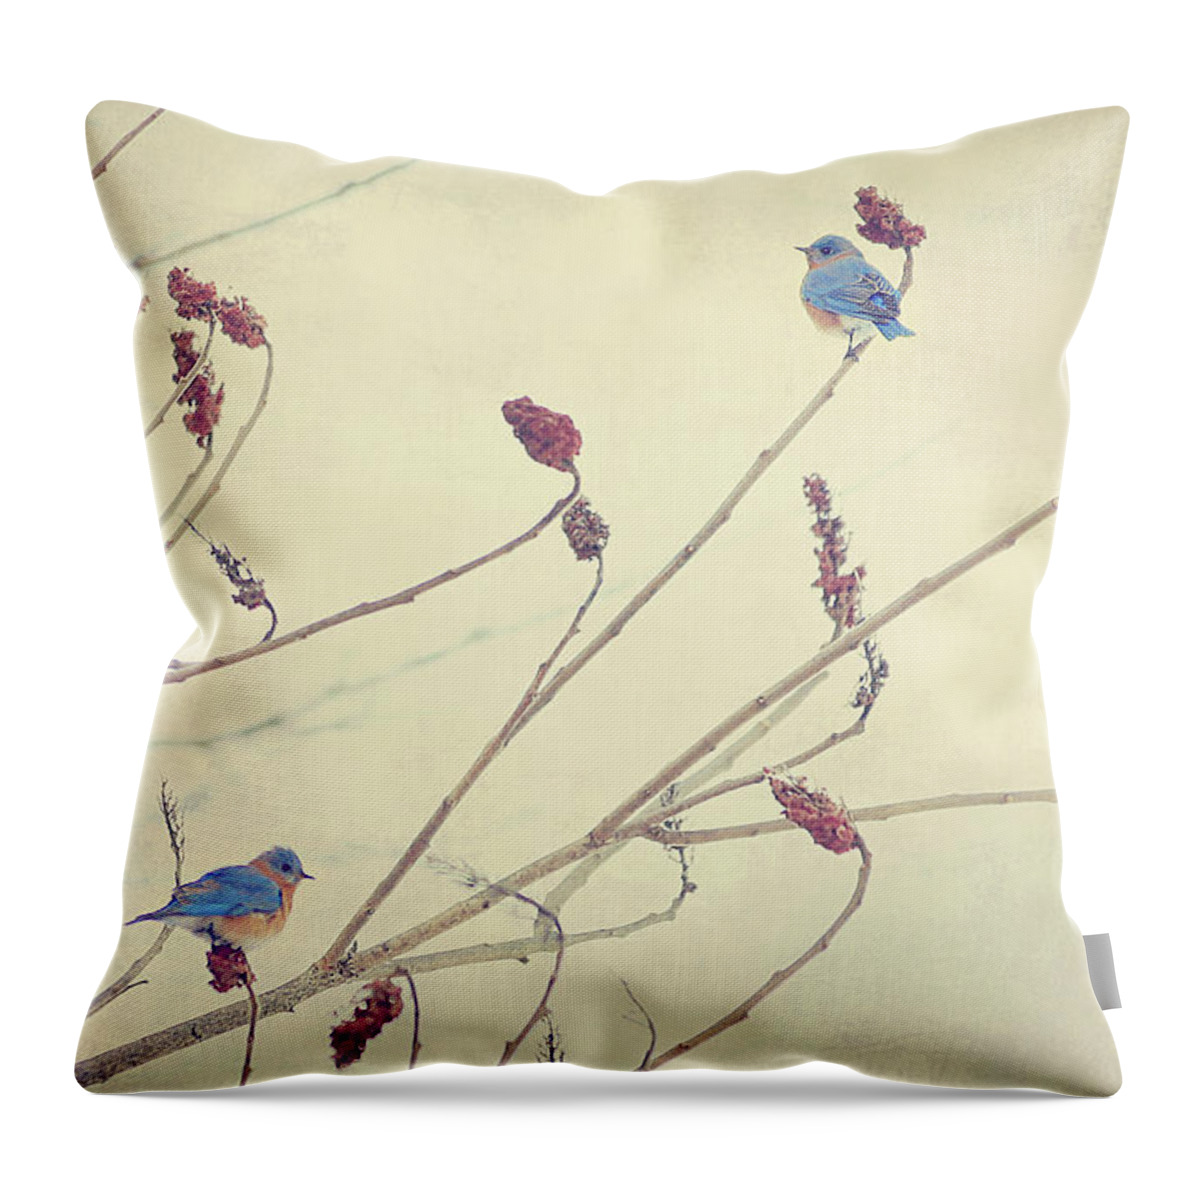 Winter Throw Pillow featuring the photograph Bluebirds by Carrie Ann Grippo-Pike